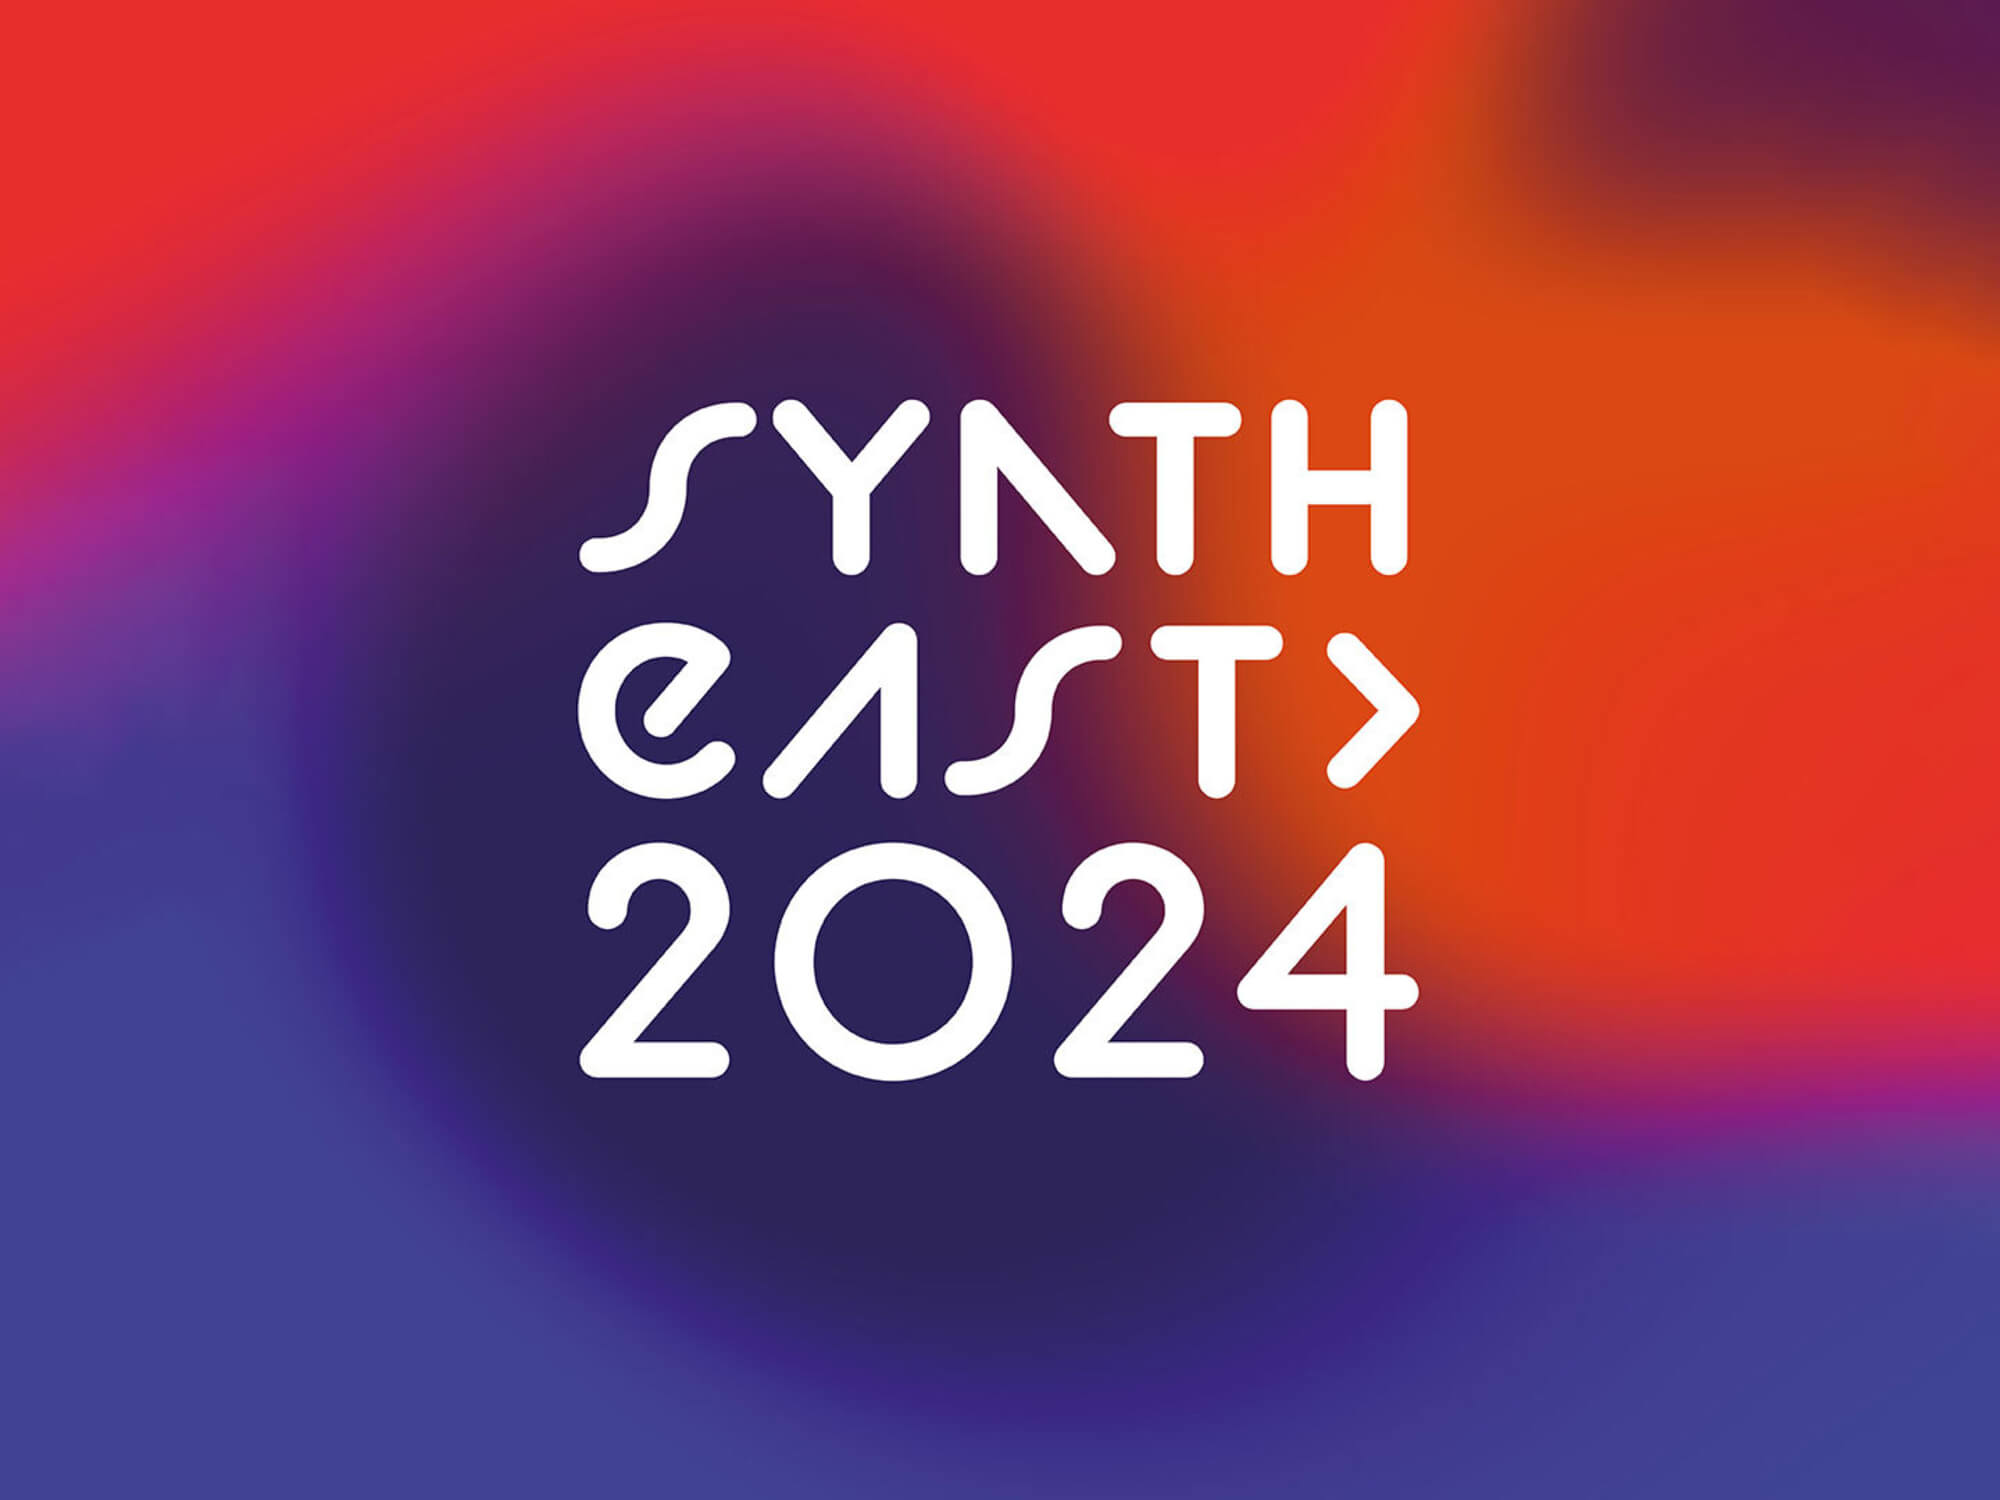 Synth East 2024